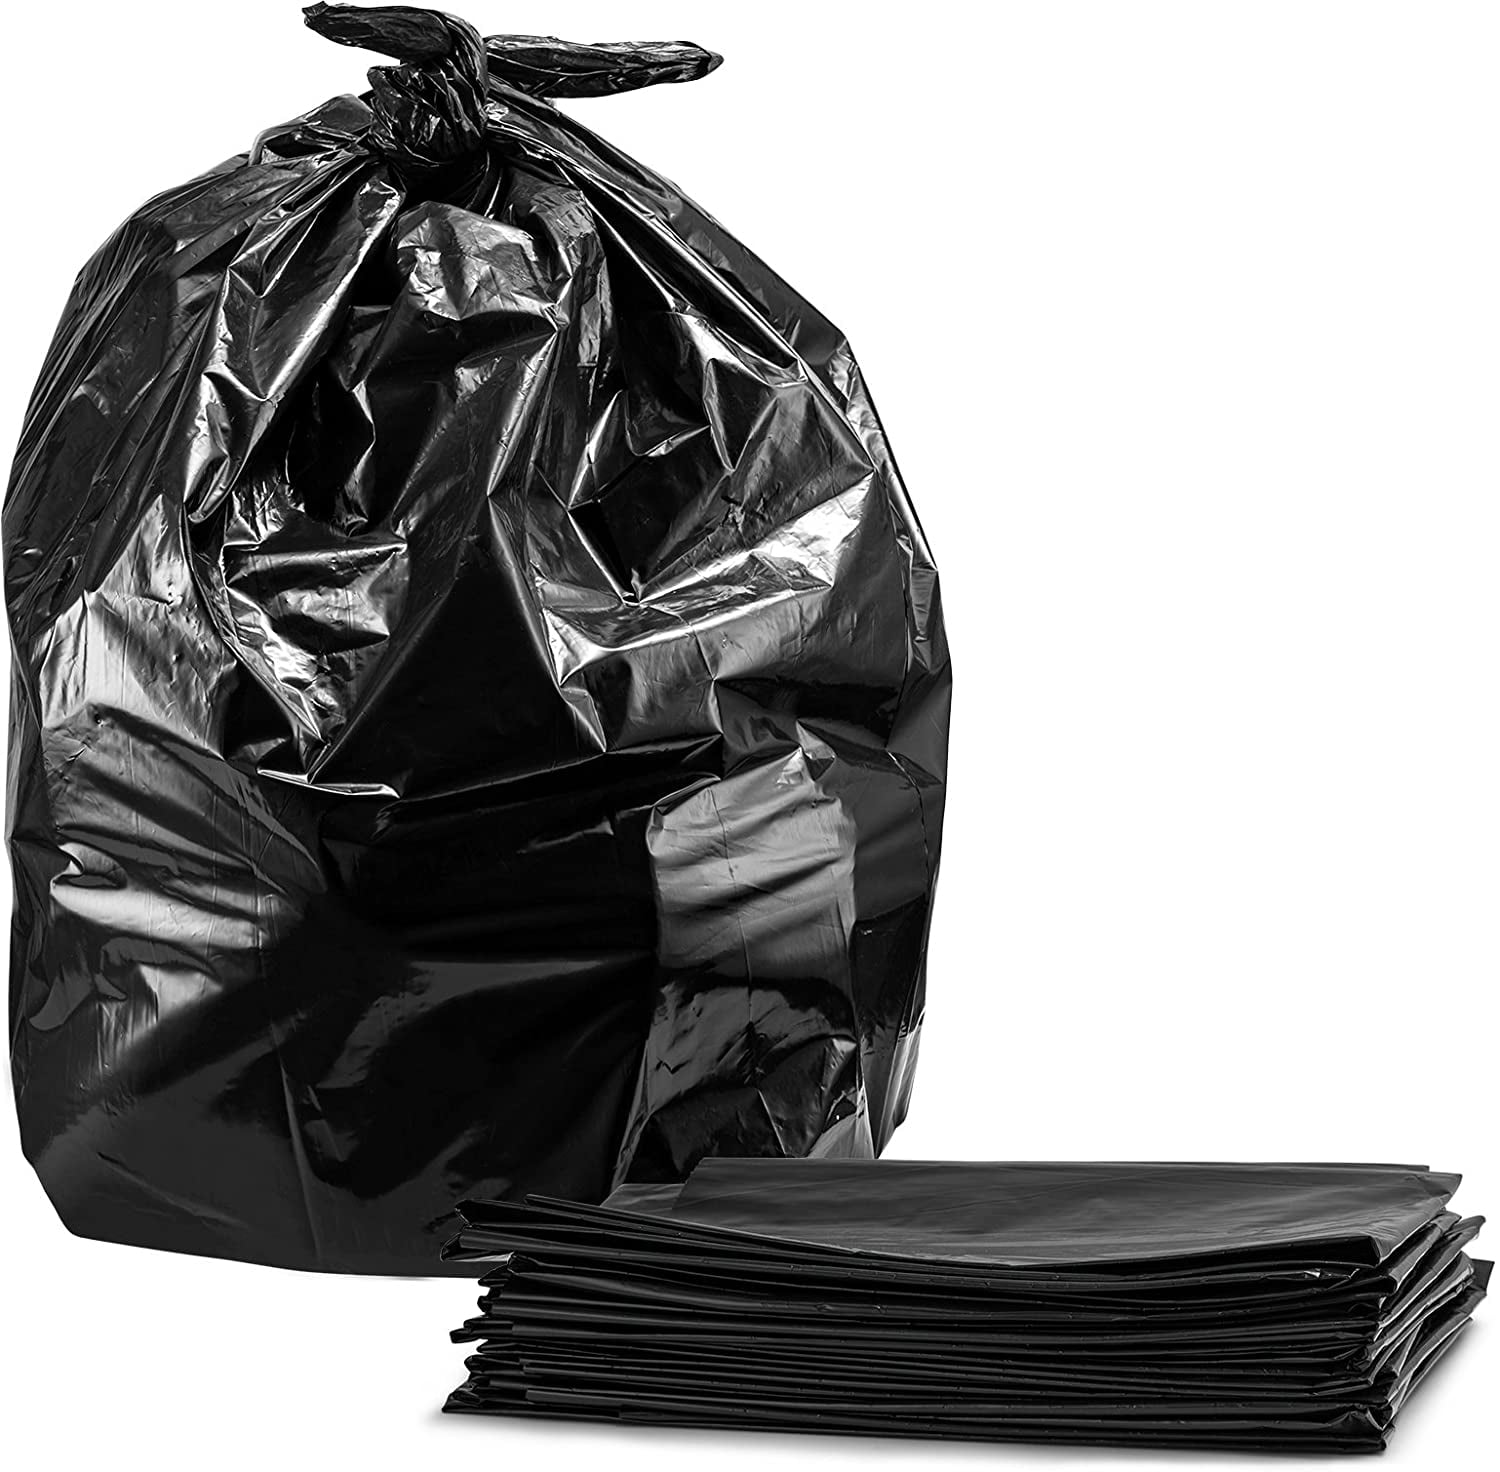 100PCS 13 Gallon Contractor Trash Bags 2 MIL Large Black Heavy Duty Garbage  Bags